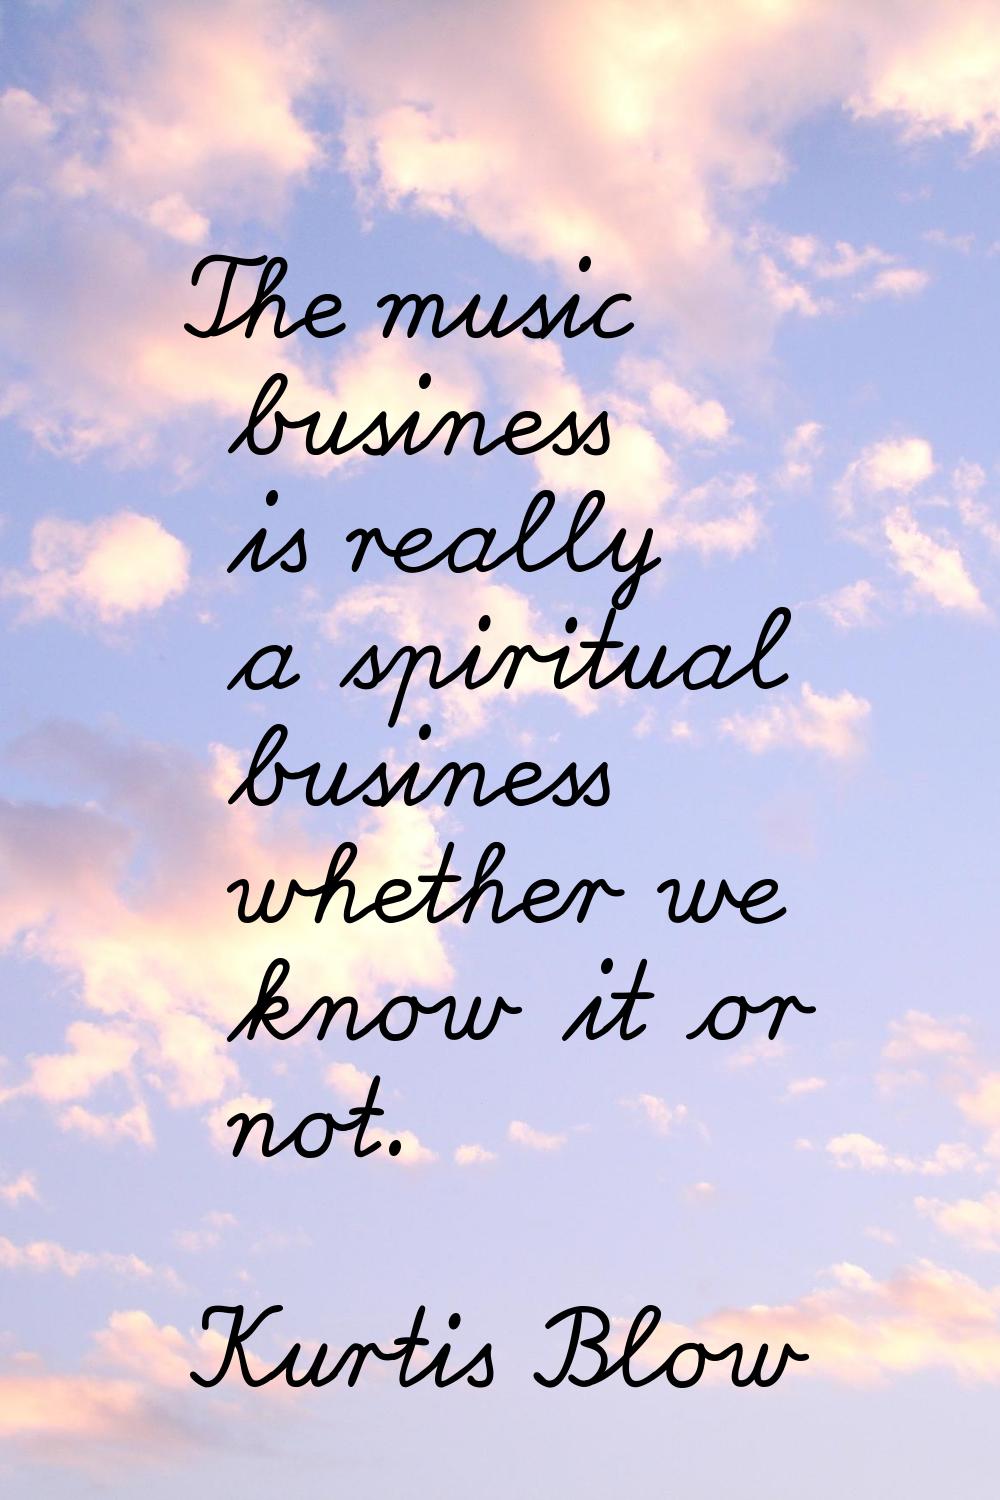 The music business is really a spiritual business whether we know it or not.